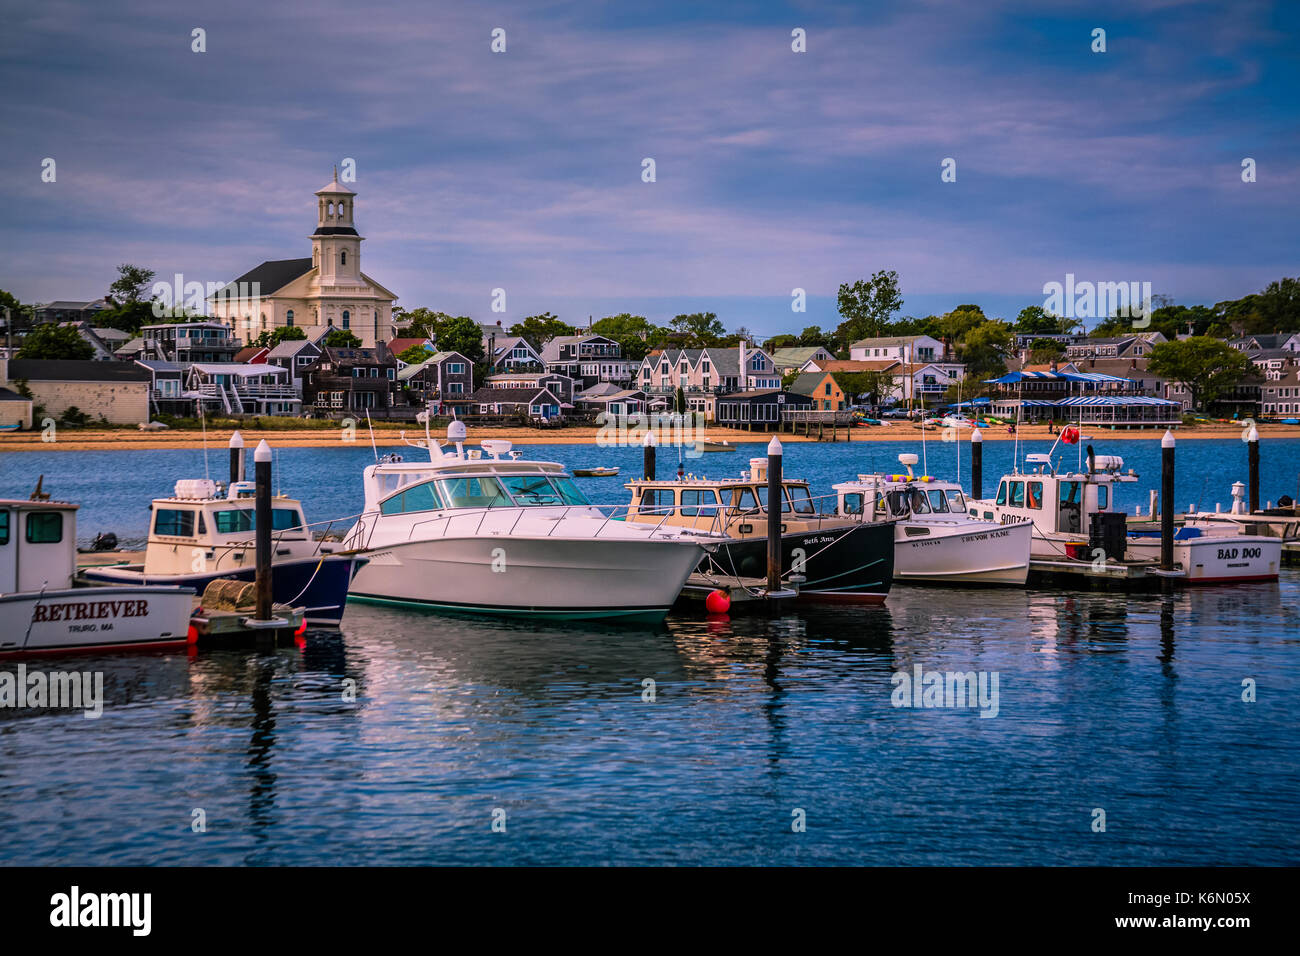 A beautiful afternoon at the colorful P-Town Harbor in Cape Cod, Massachusetts. Stock Photo